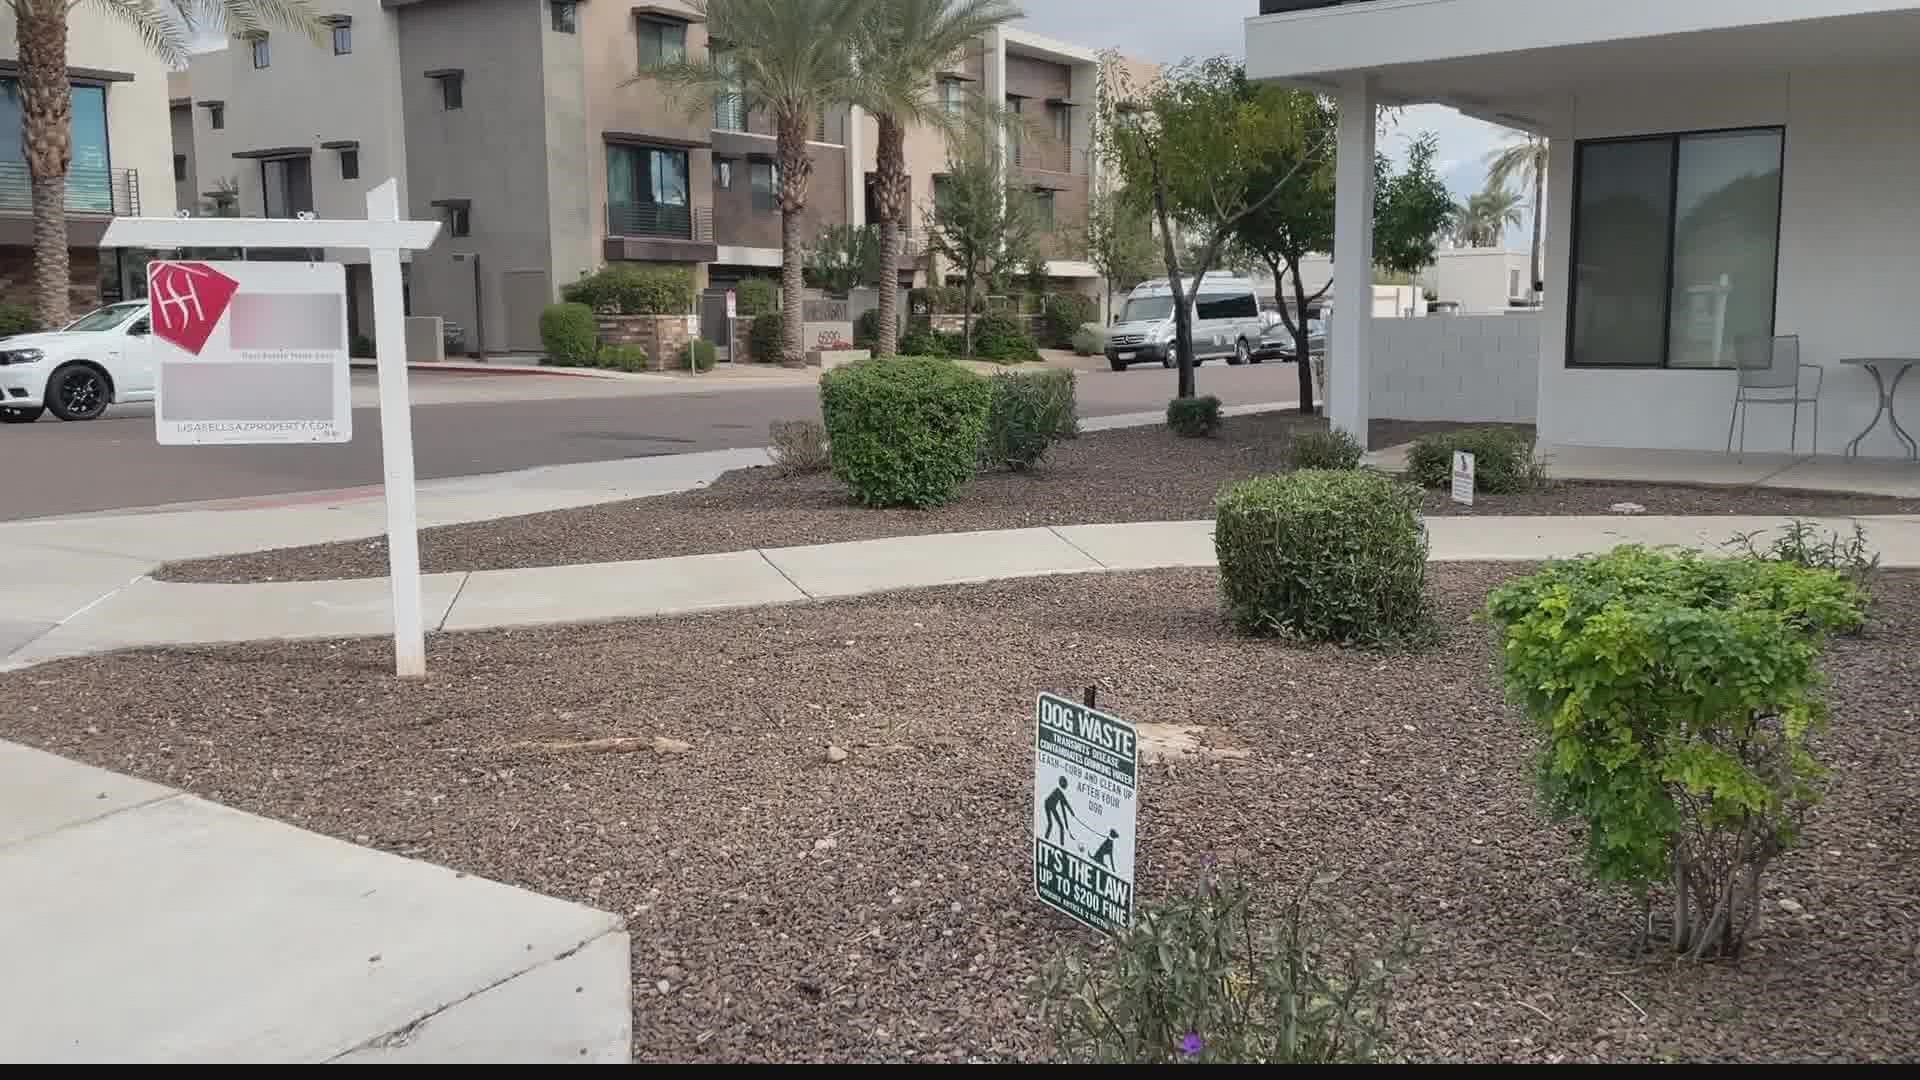 It's no secret that the Valley has been experiencing a hot housing market. A real estate expert at ASU says we're starting to see a slight shift in the market.